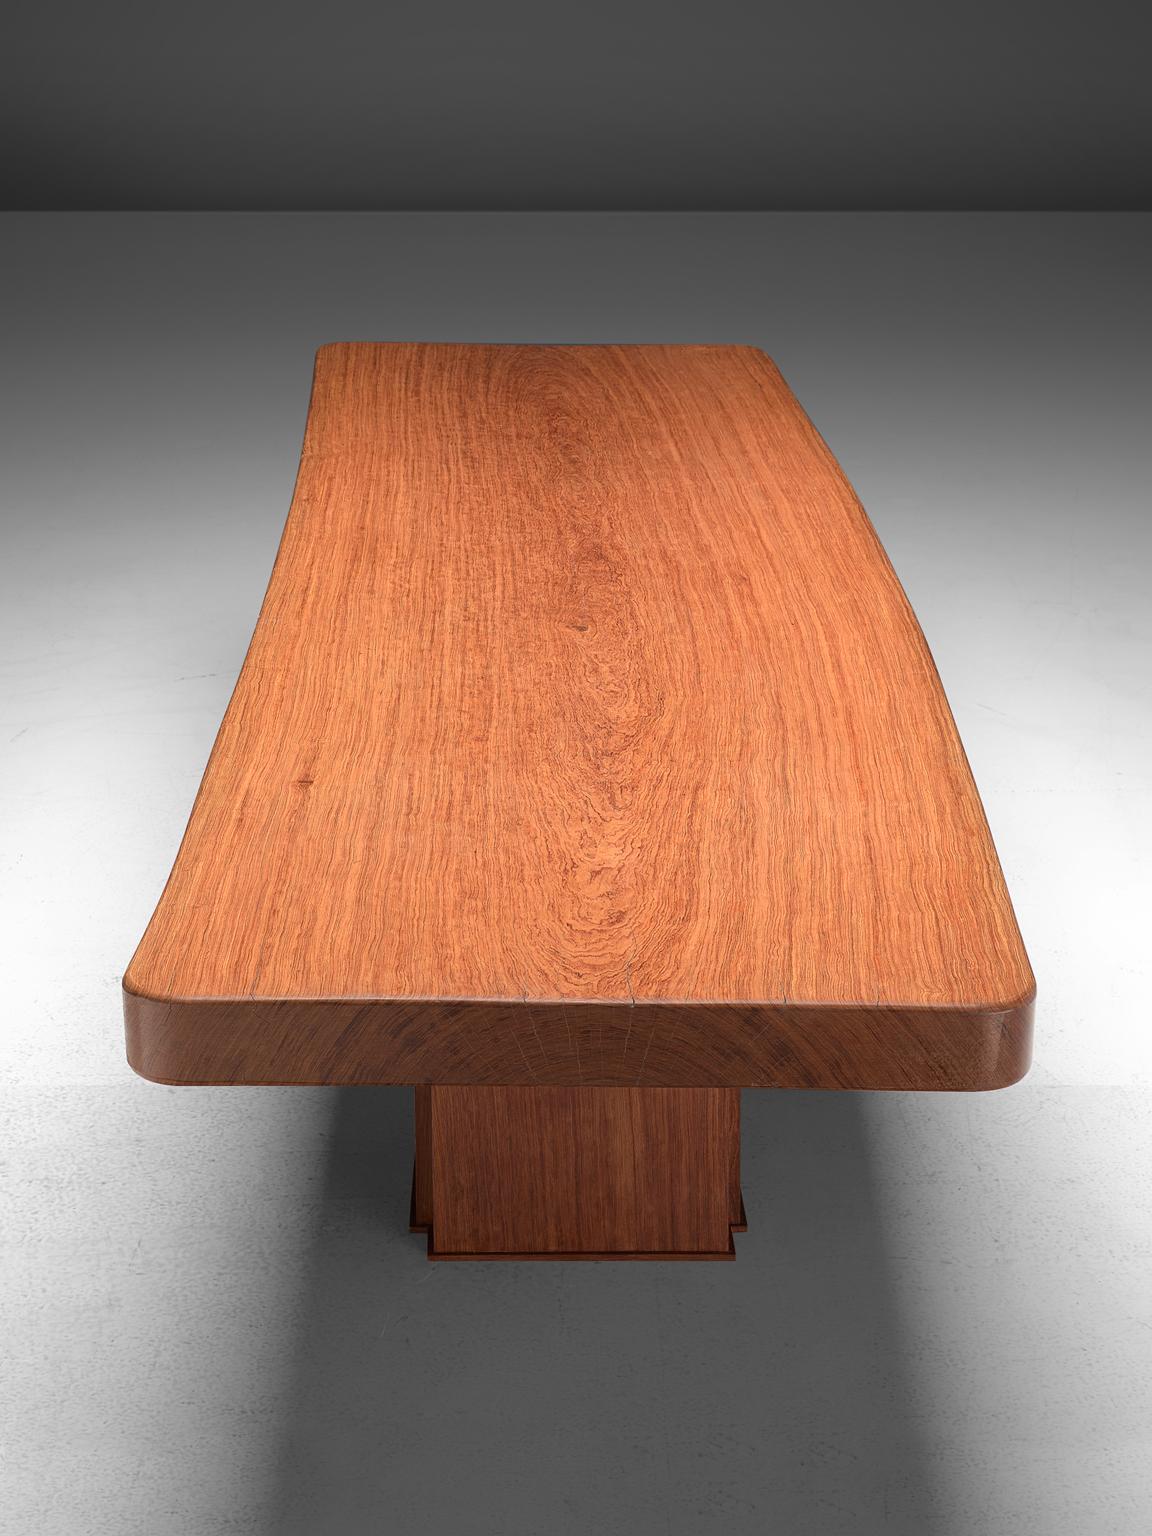 Spanish Conference Table in Solid Bubinga Wood 2